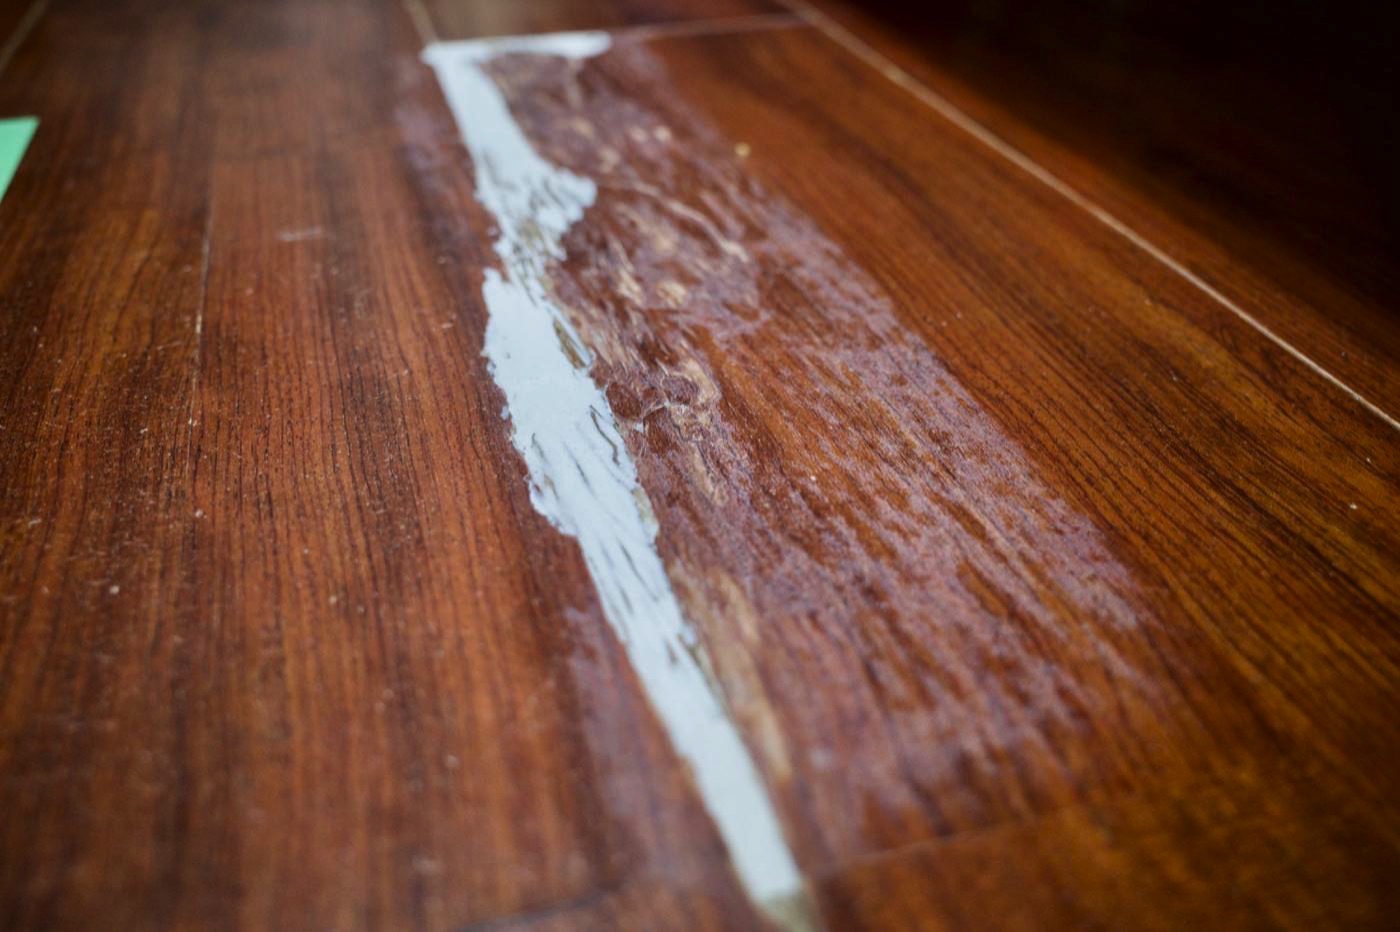 Repaired badly cracked flooring with diy 00019